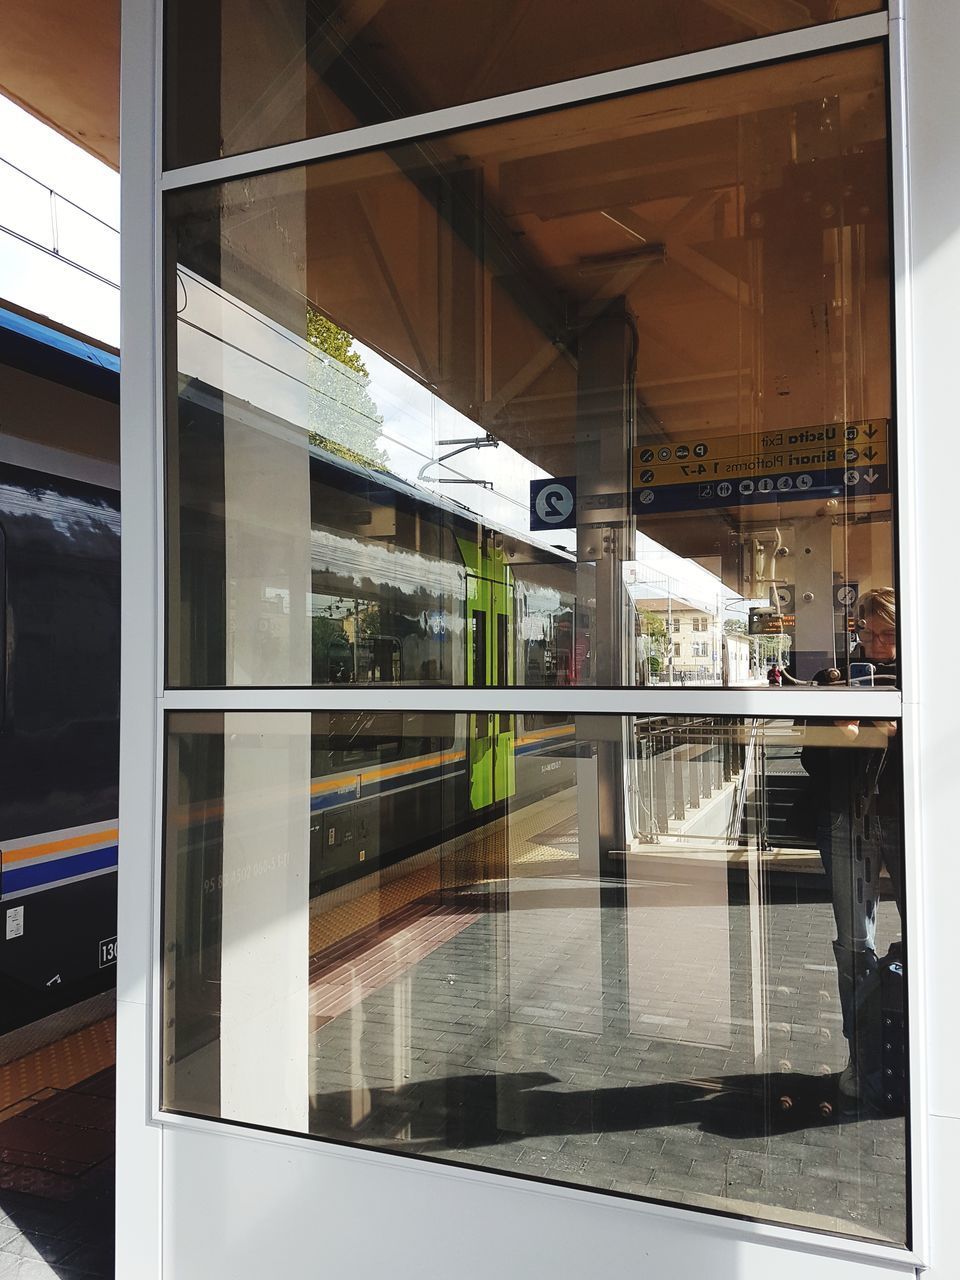 REFLECTION OF TRAIN ON GLASS WINDOW OF RAILROAD STATION